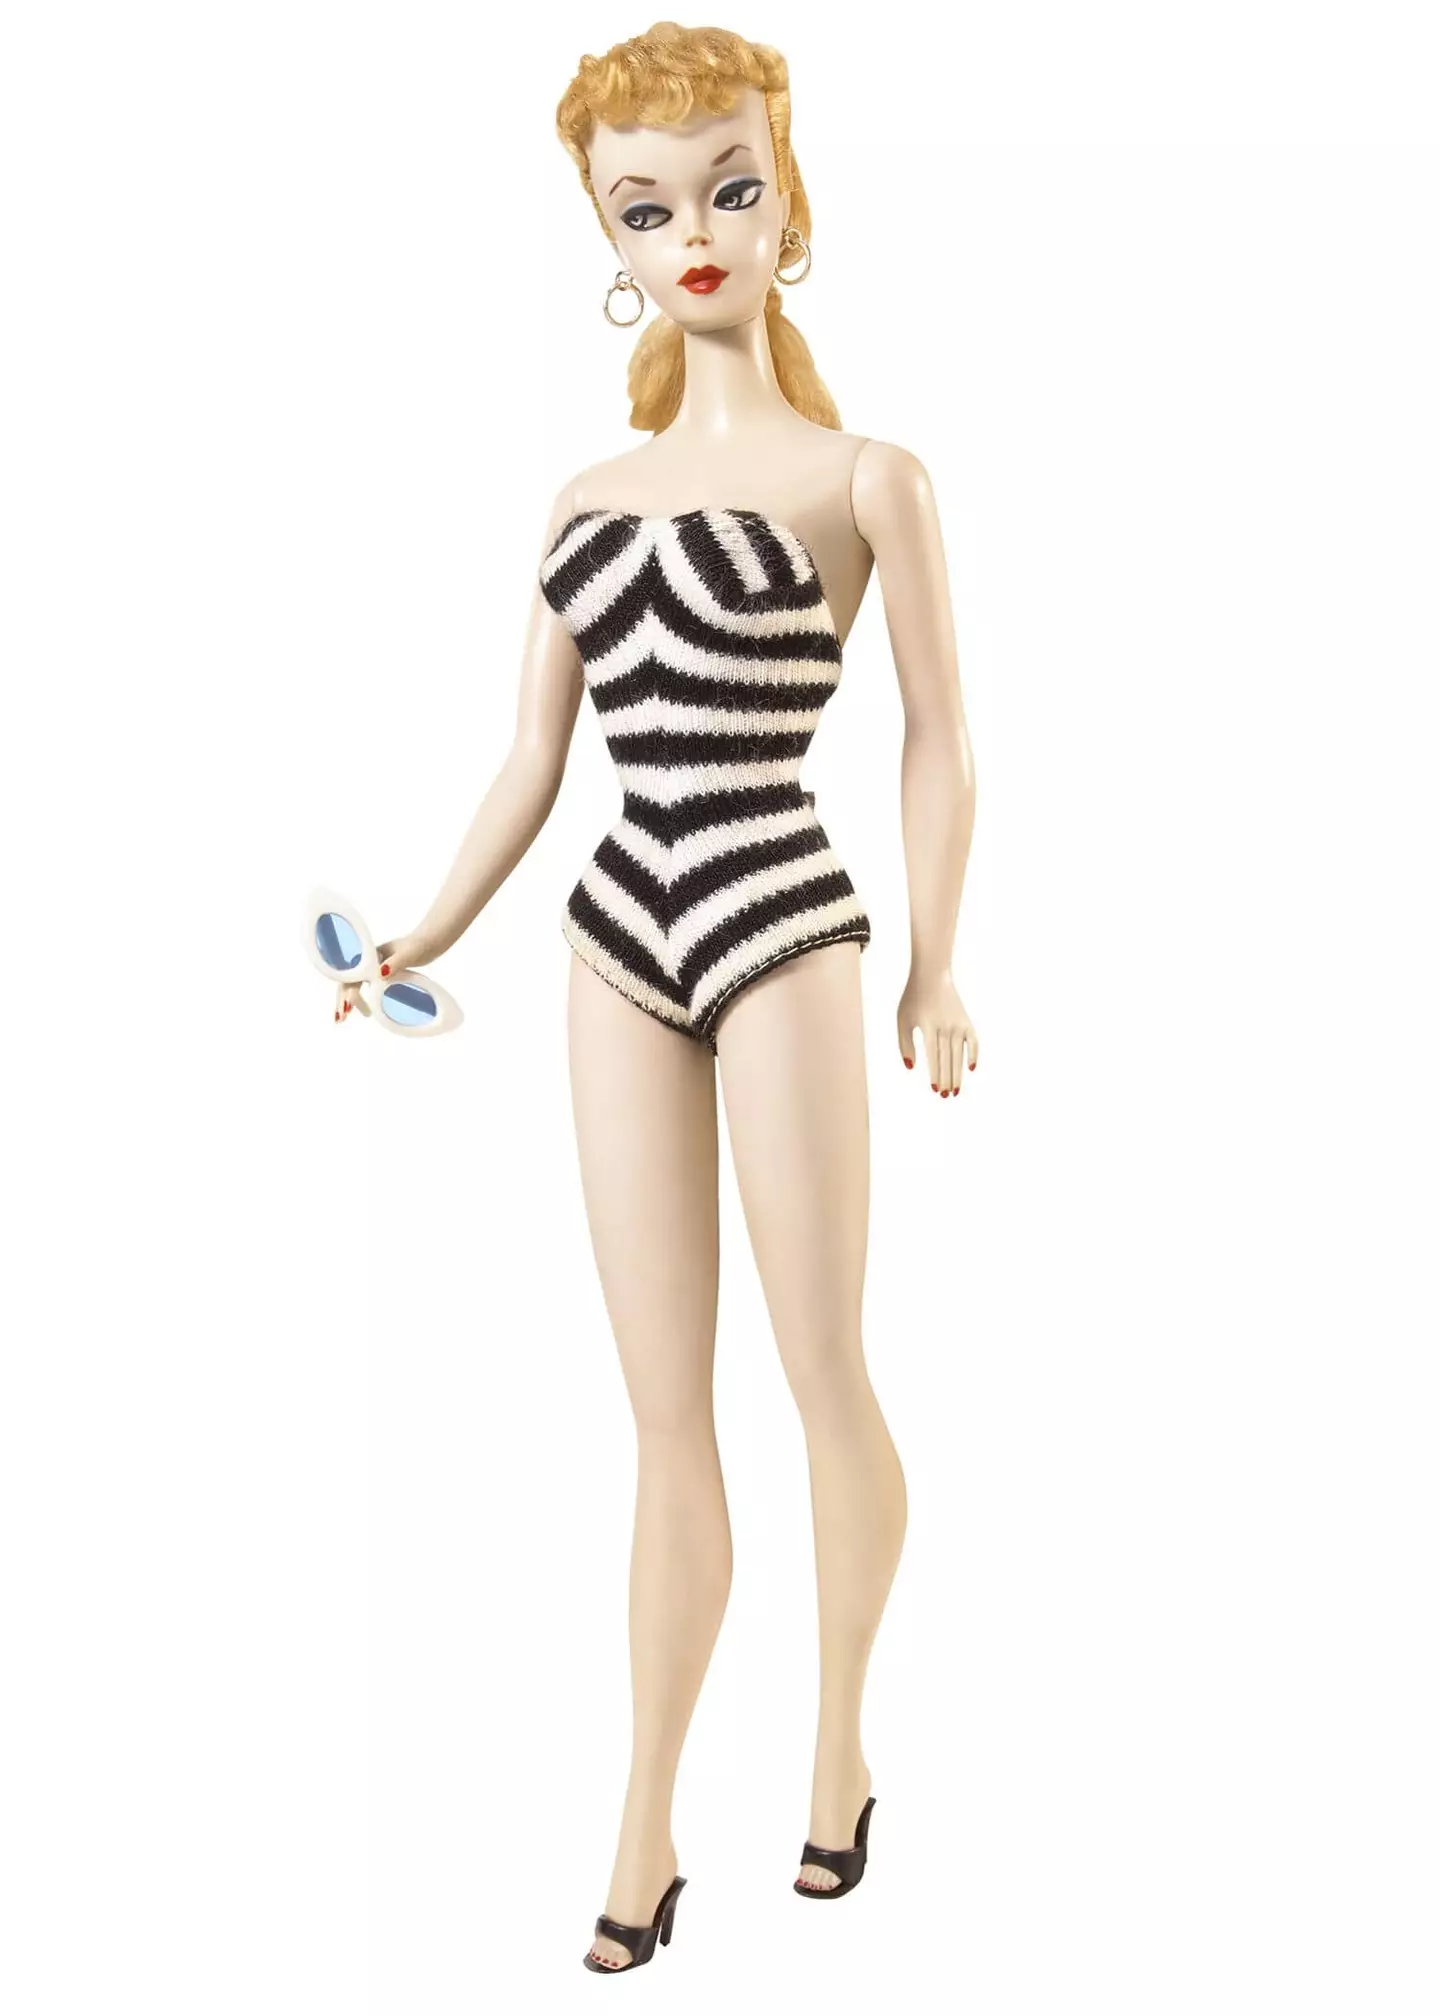 The 1959 Barbie is still a classic collectable.